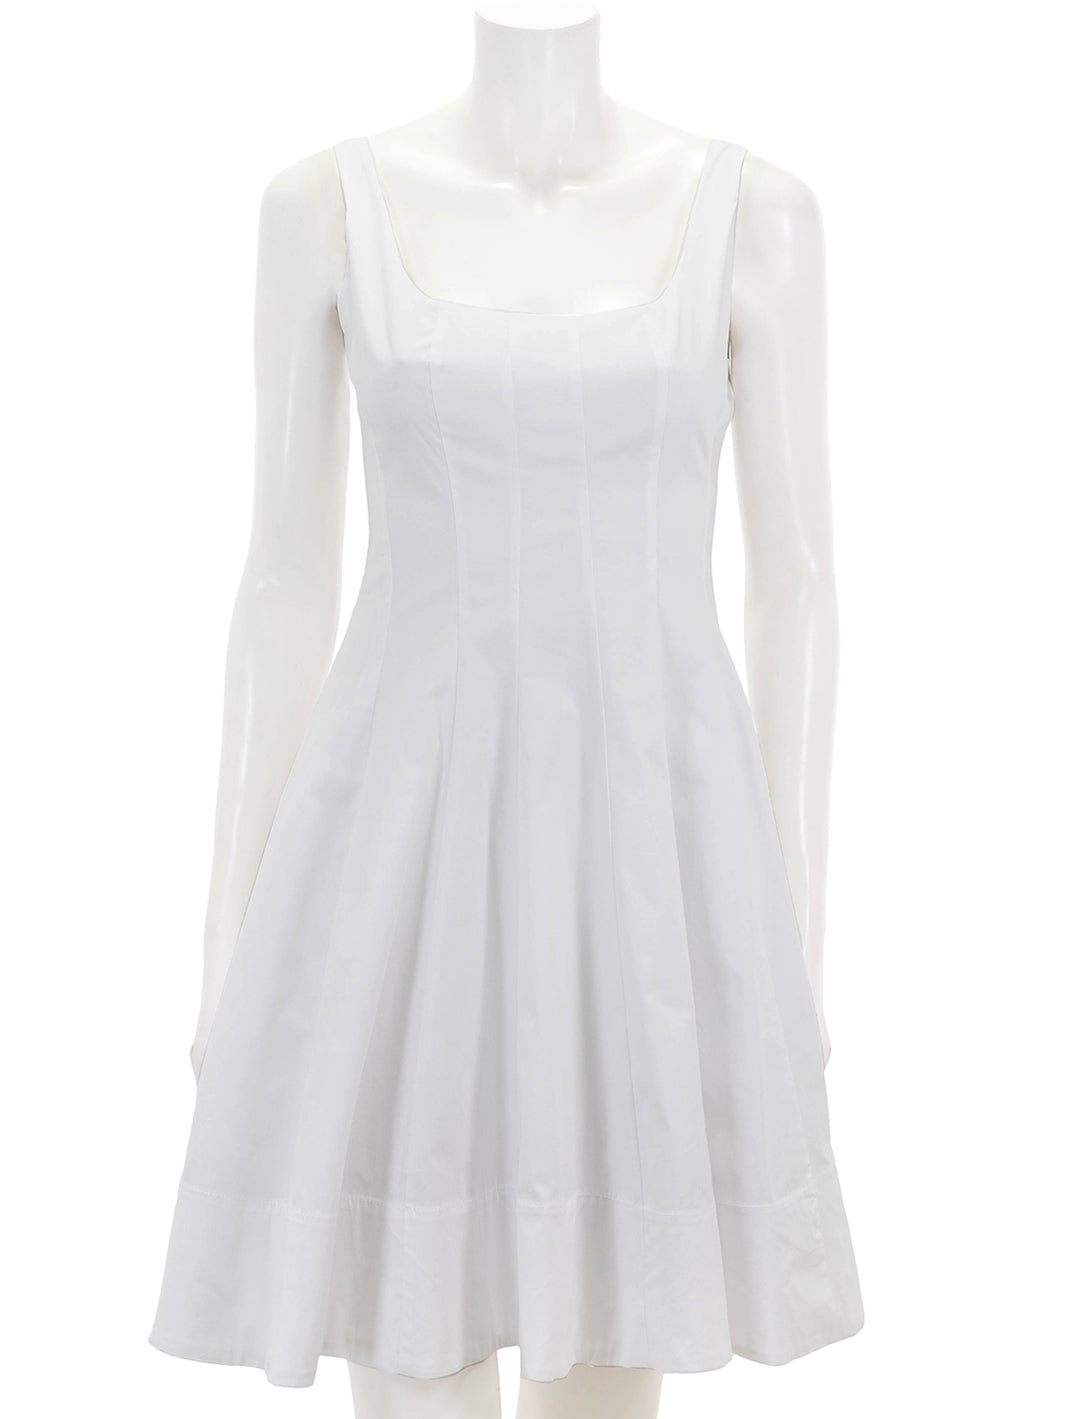 Front view of STAUD's mini wells dress in white.